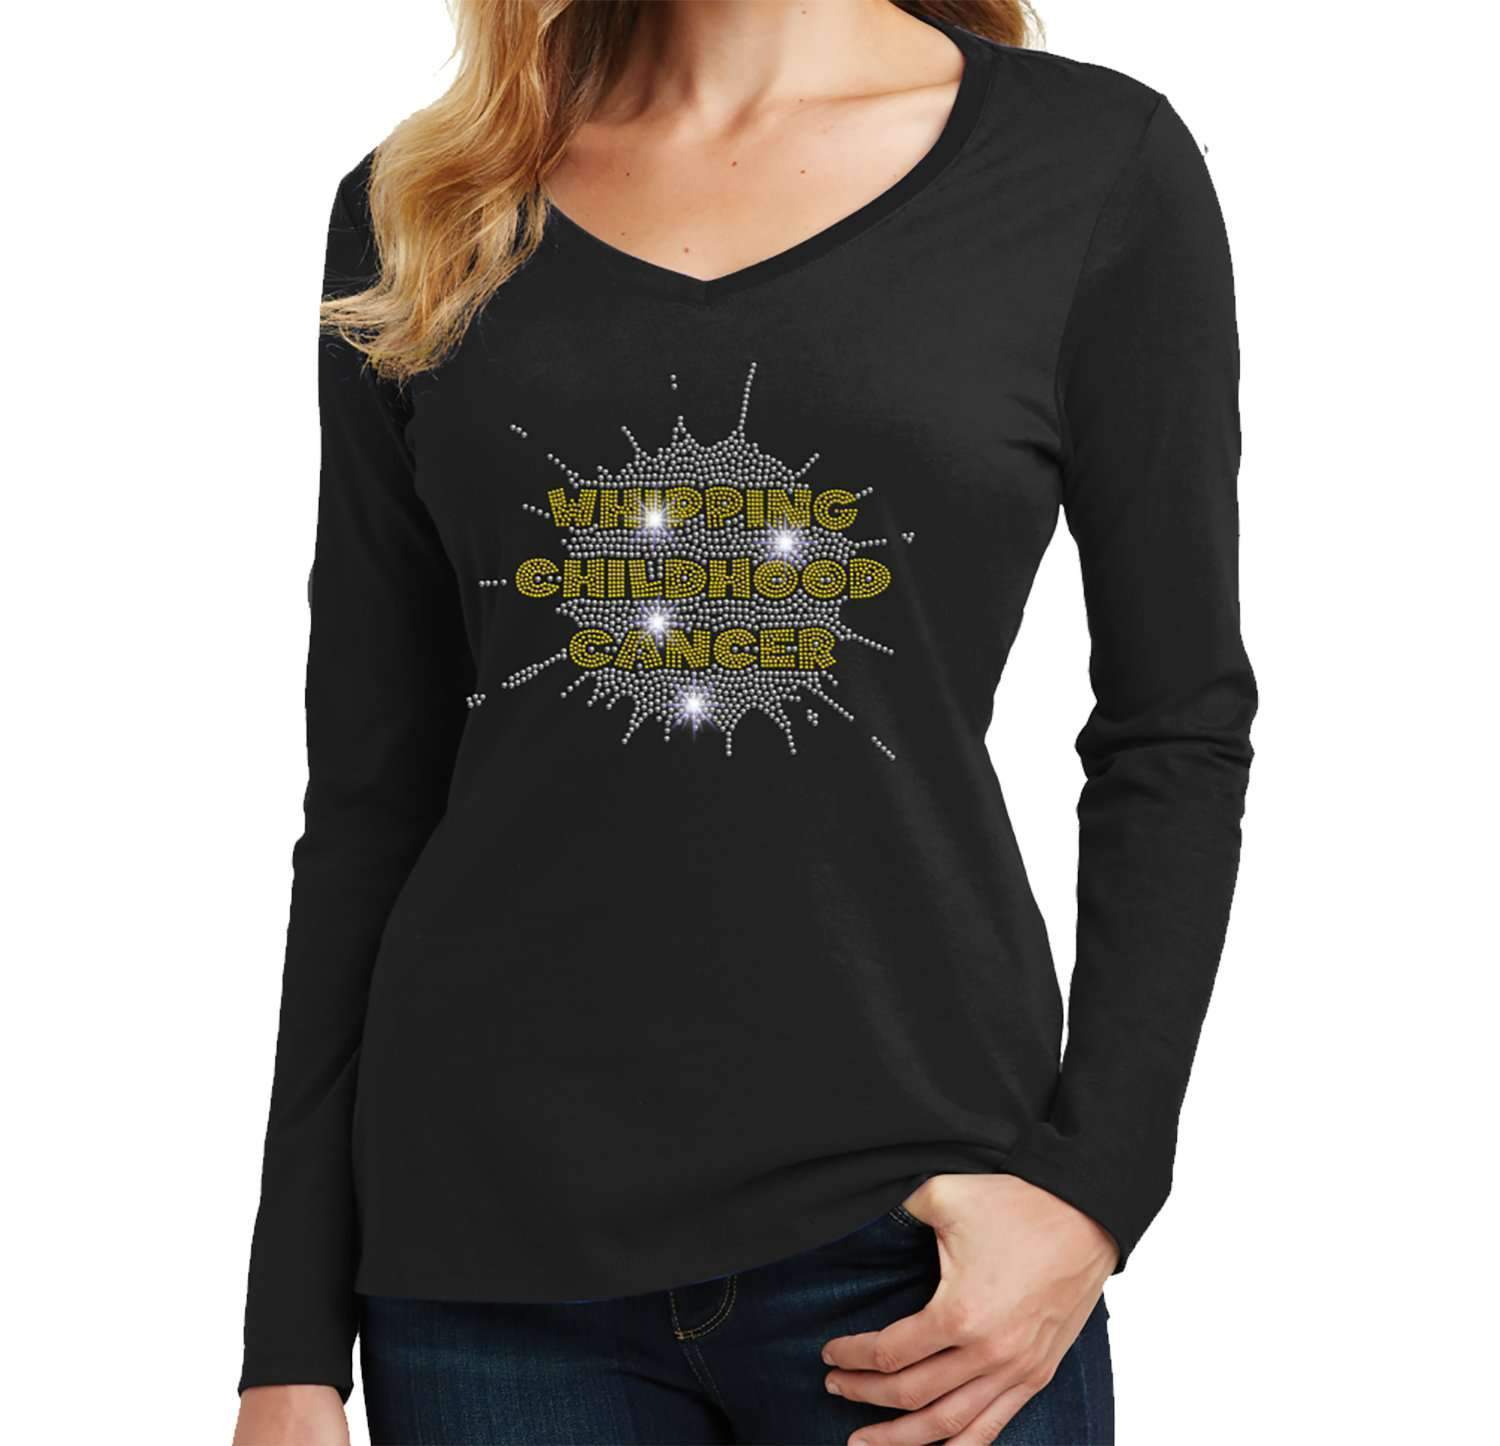 Whipping Childhood Cancer Spangle Rhinestone Bling- Womens Long Sleeve V-Neck Shirt VIEW ALL DESIGNS Becky's Boutique Extra Small 